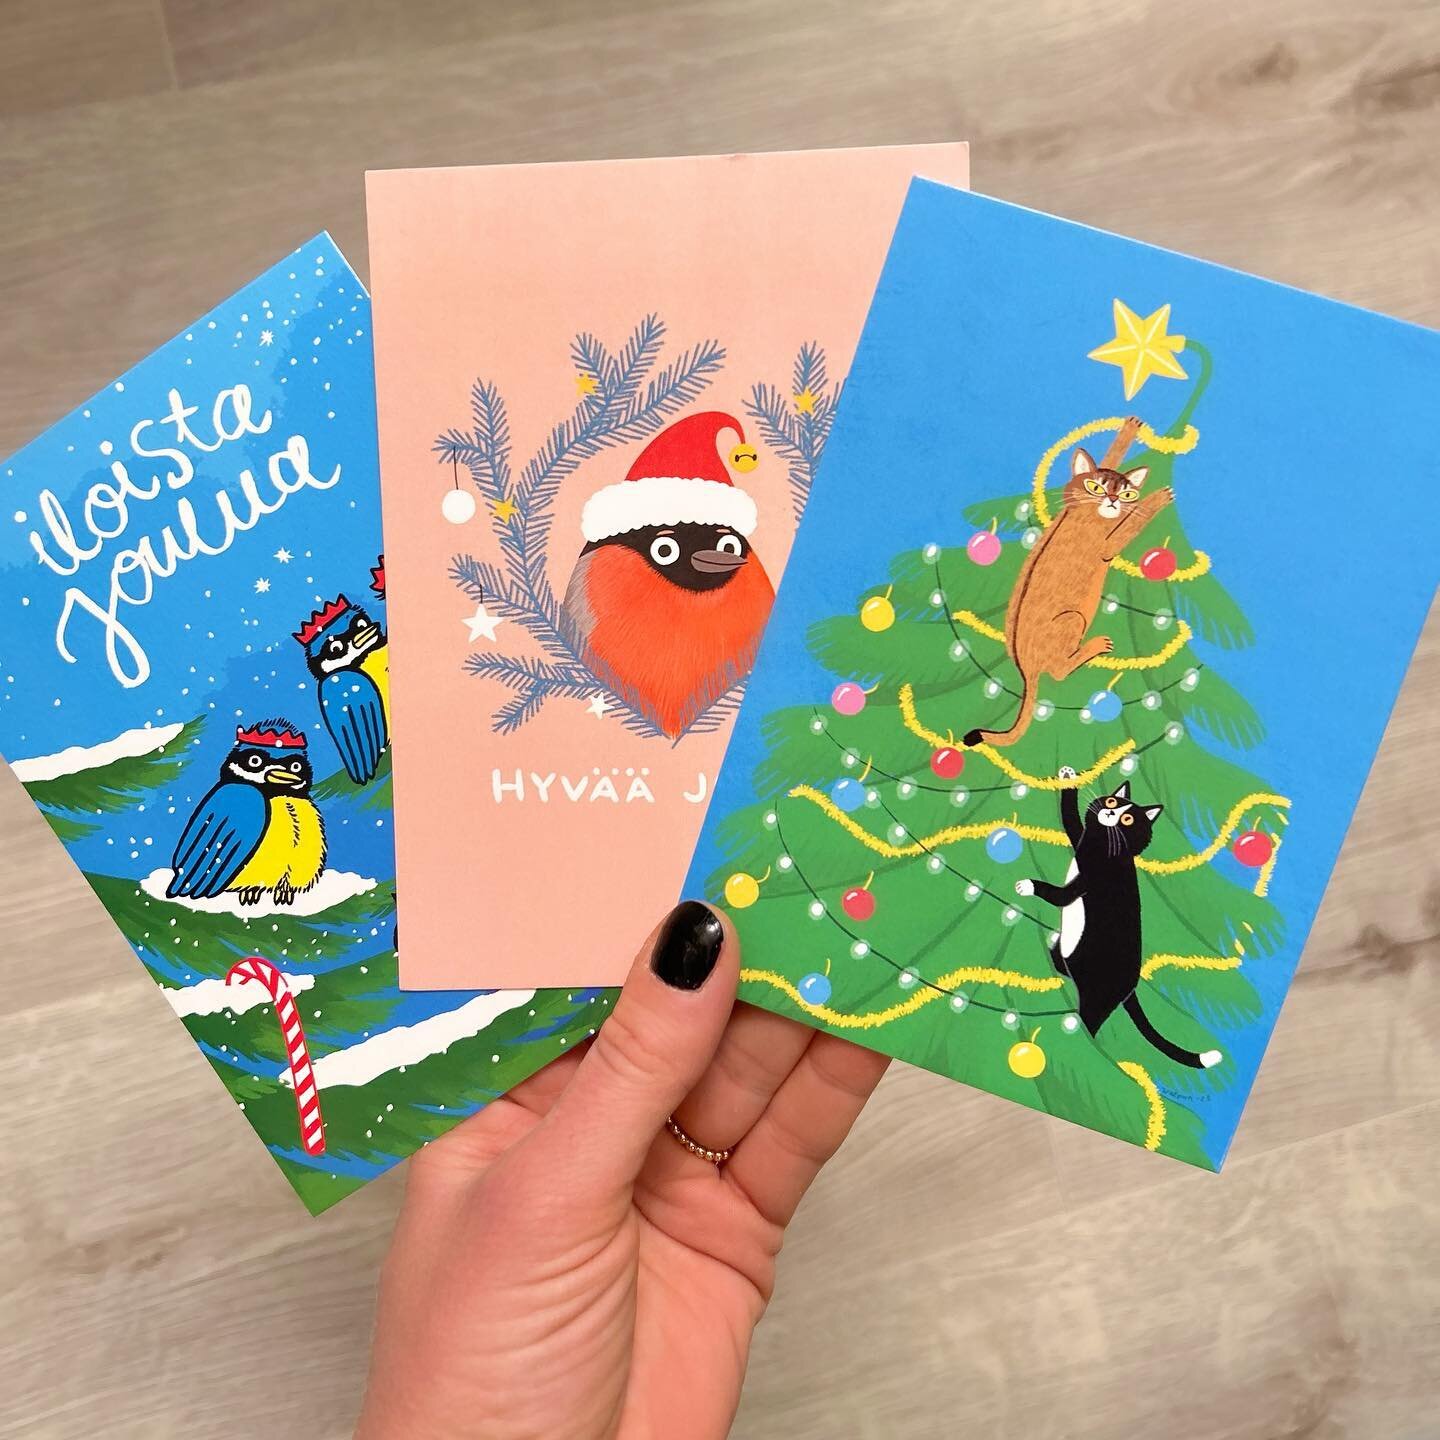 ❤️ My winter holiday cards this year ❤️
Which one is your favourite? 🎄
You can find these from some of my restockists and at all of my events I&rsquo;m tabling at, my schedule is pinned to my insta wall ❤️
.
.
#christmascards #joulukortti #postcross